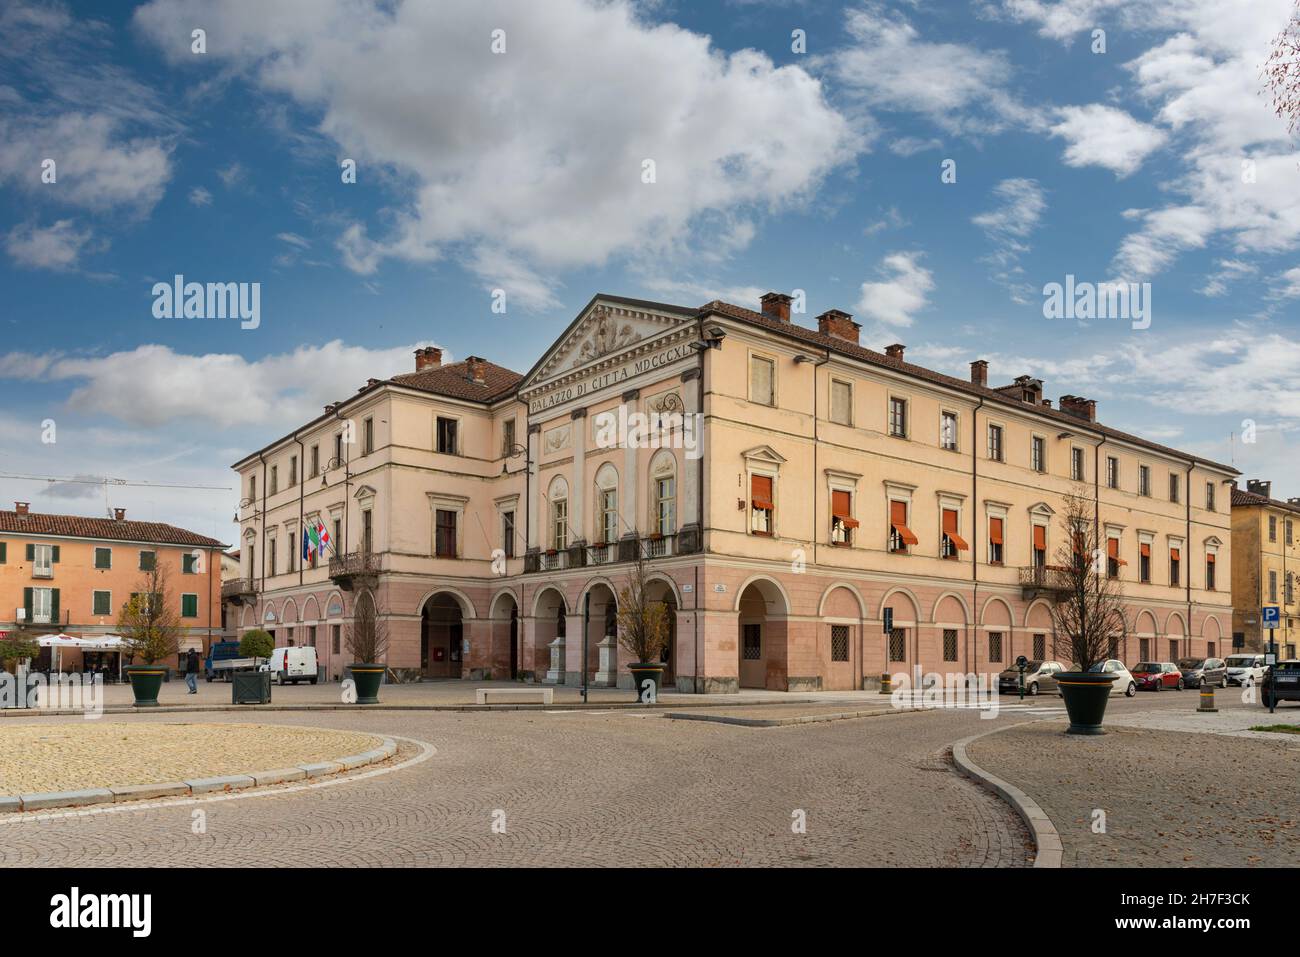 Racconigi, Cuneo, Piedmont, Italy - November 16, 2021: town hall in piazza Carlo Alberto the main square in front at Royal Castle Stock Photo